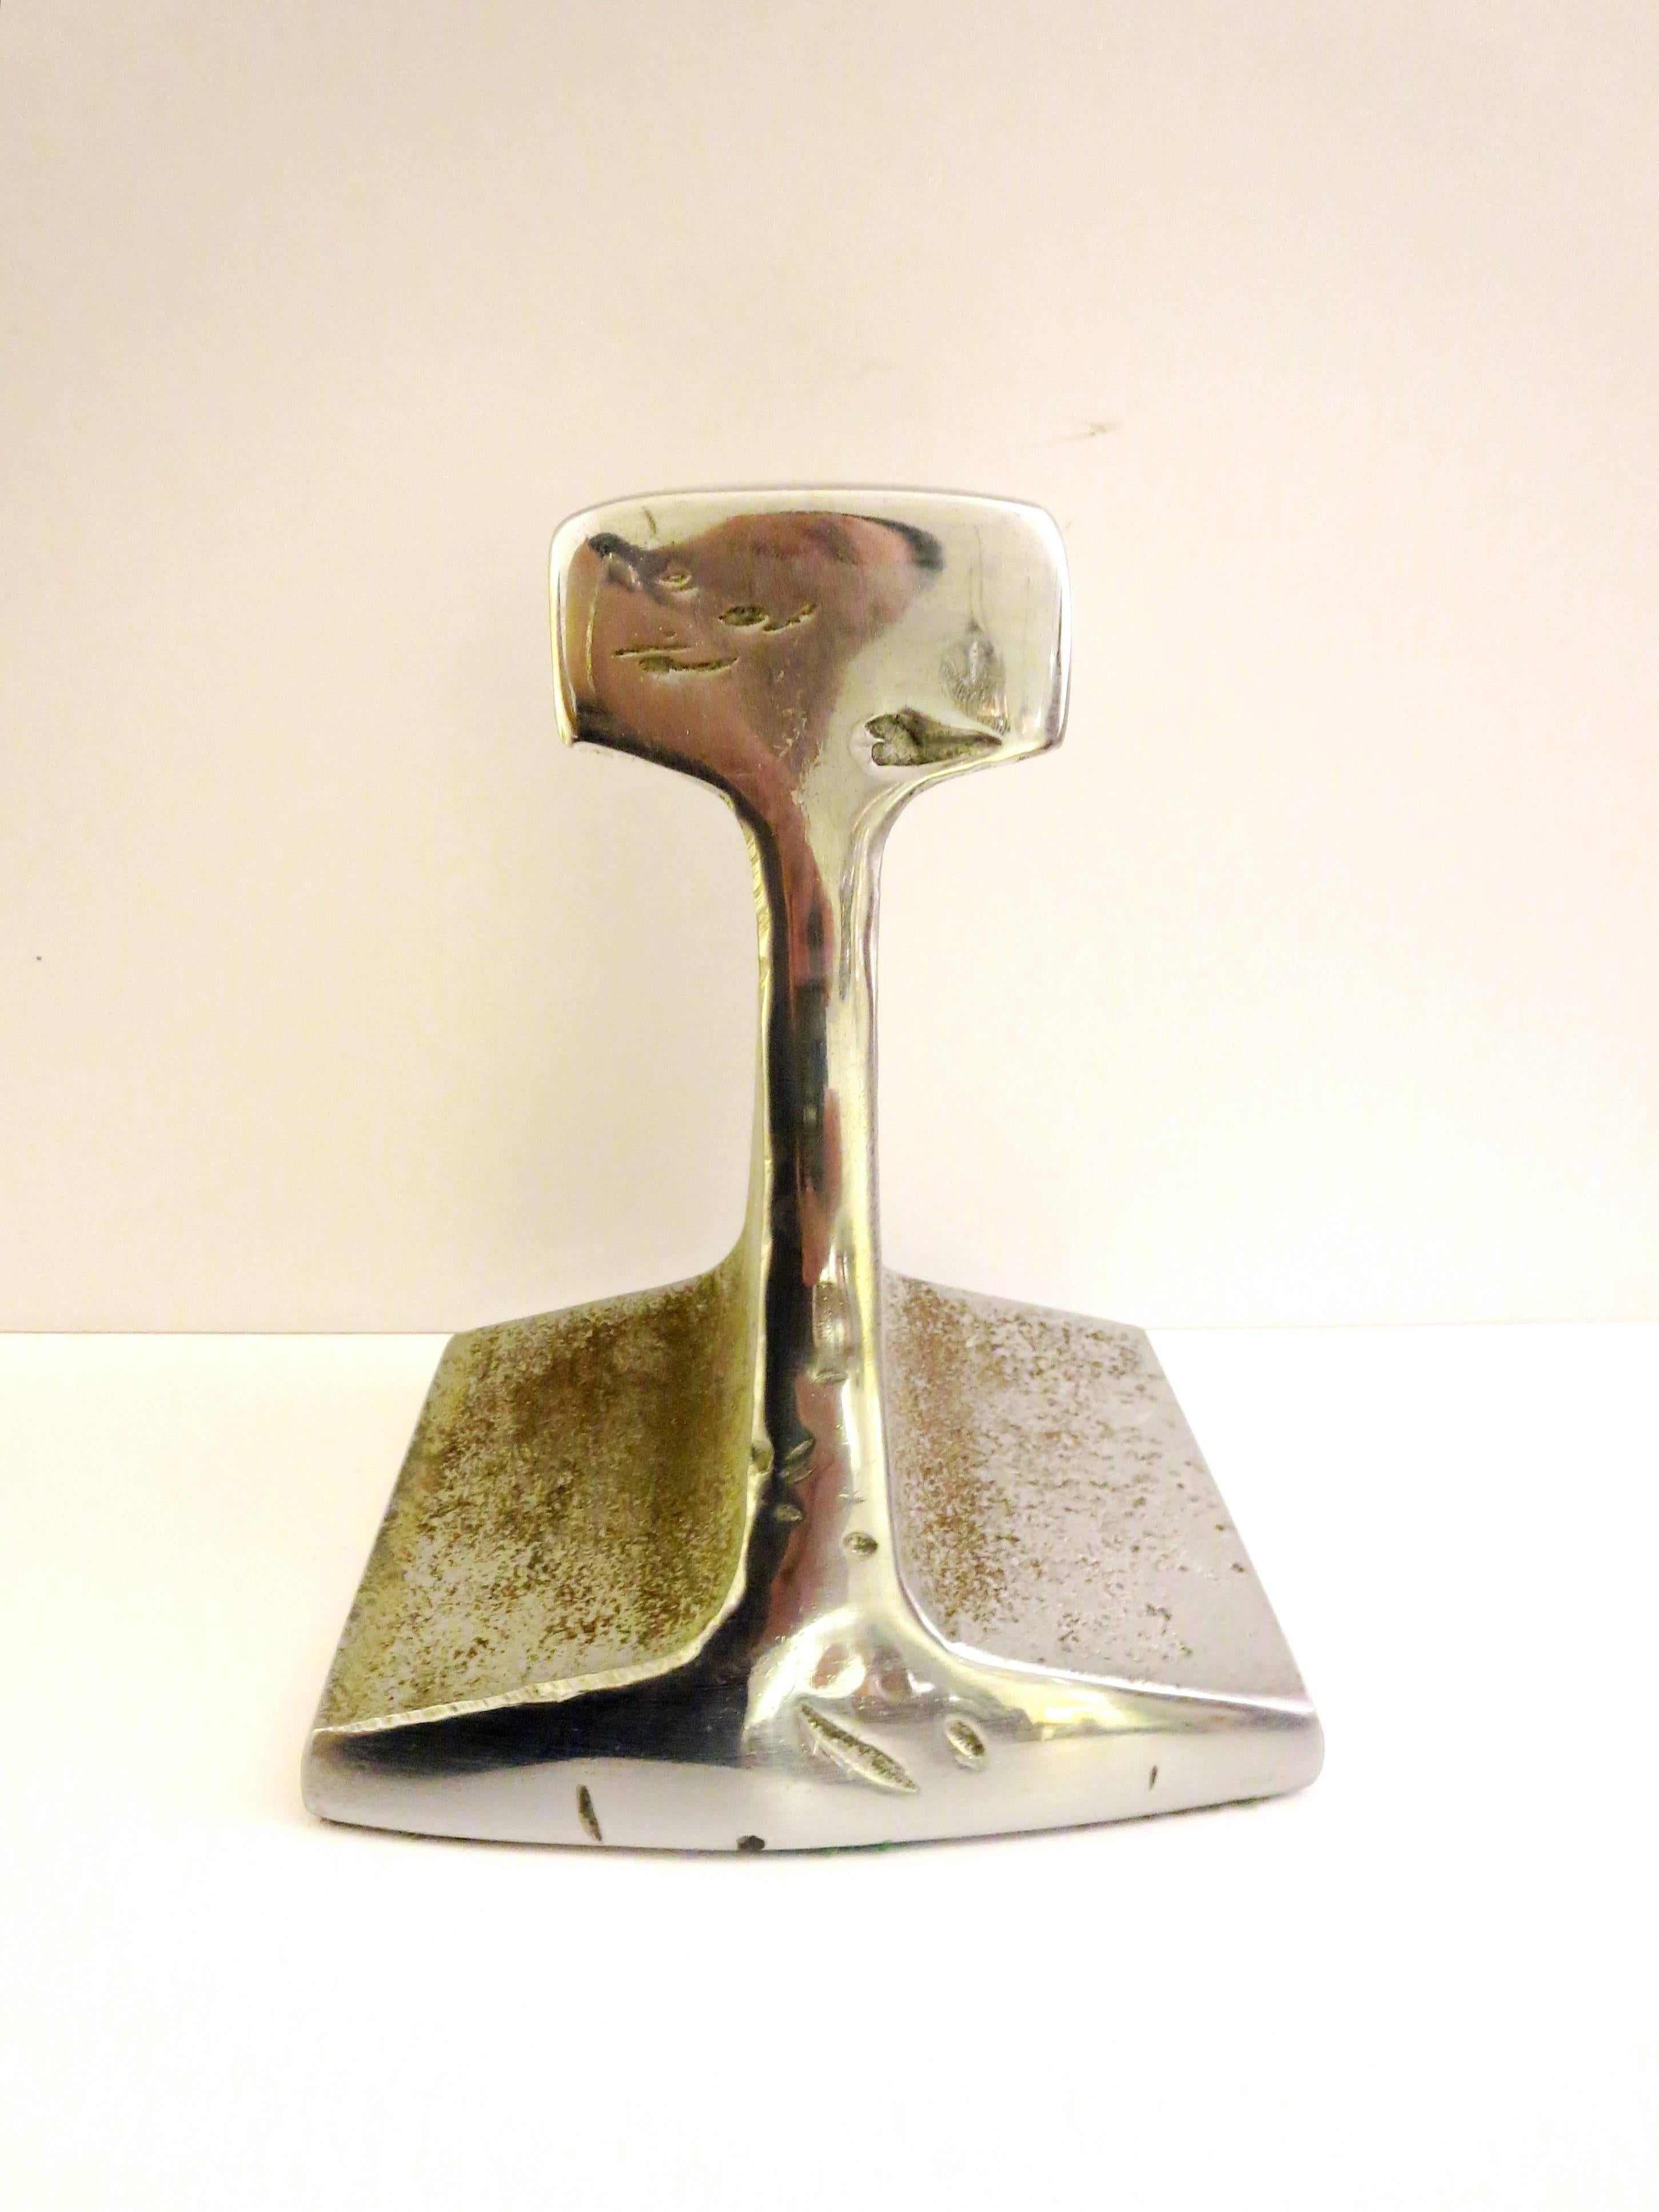 American One of a Kind Massive I-Beam Solid Steel Bookend/Door Stopper in a Chrome Finish